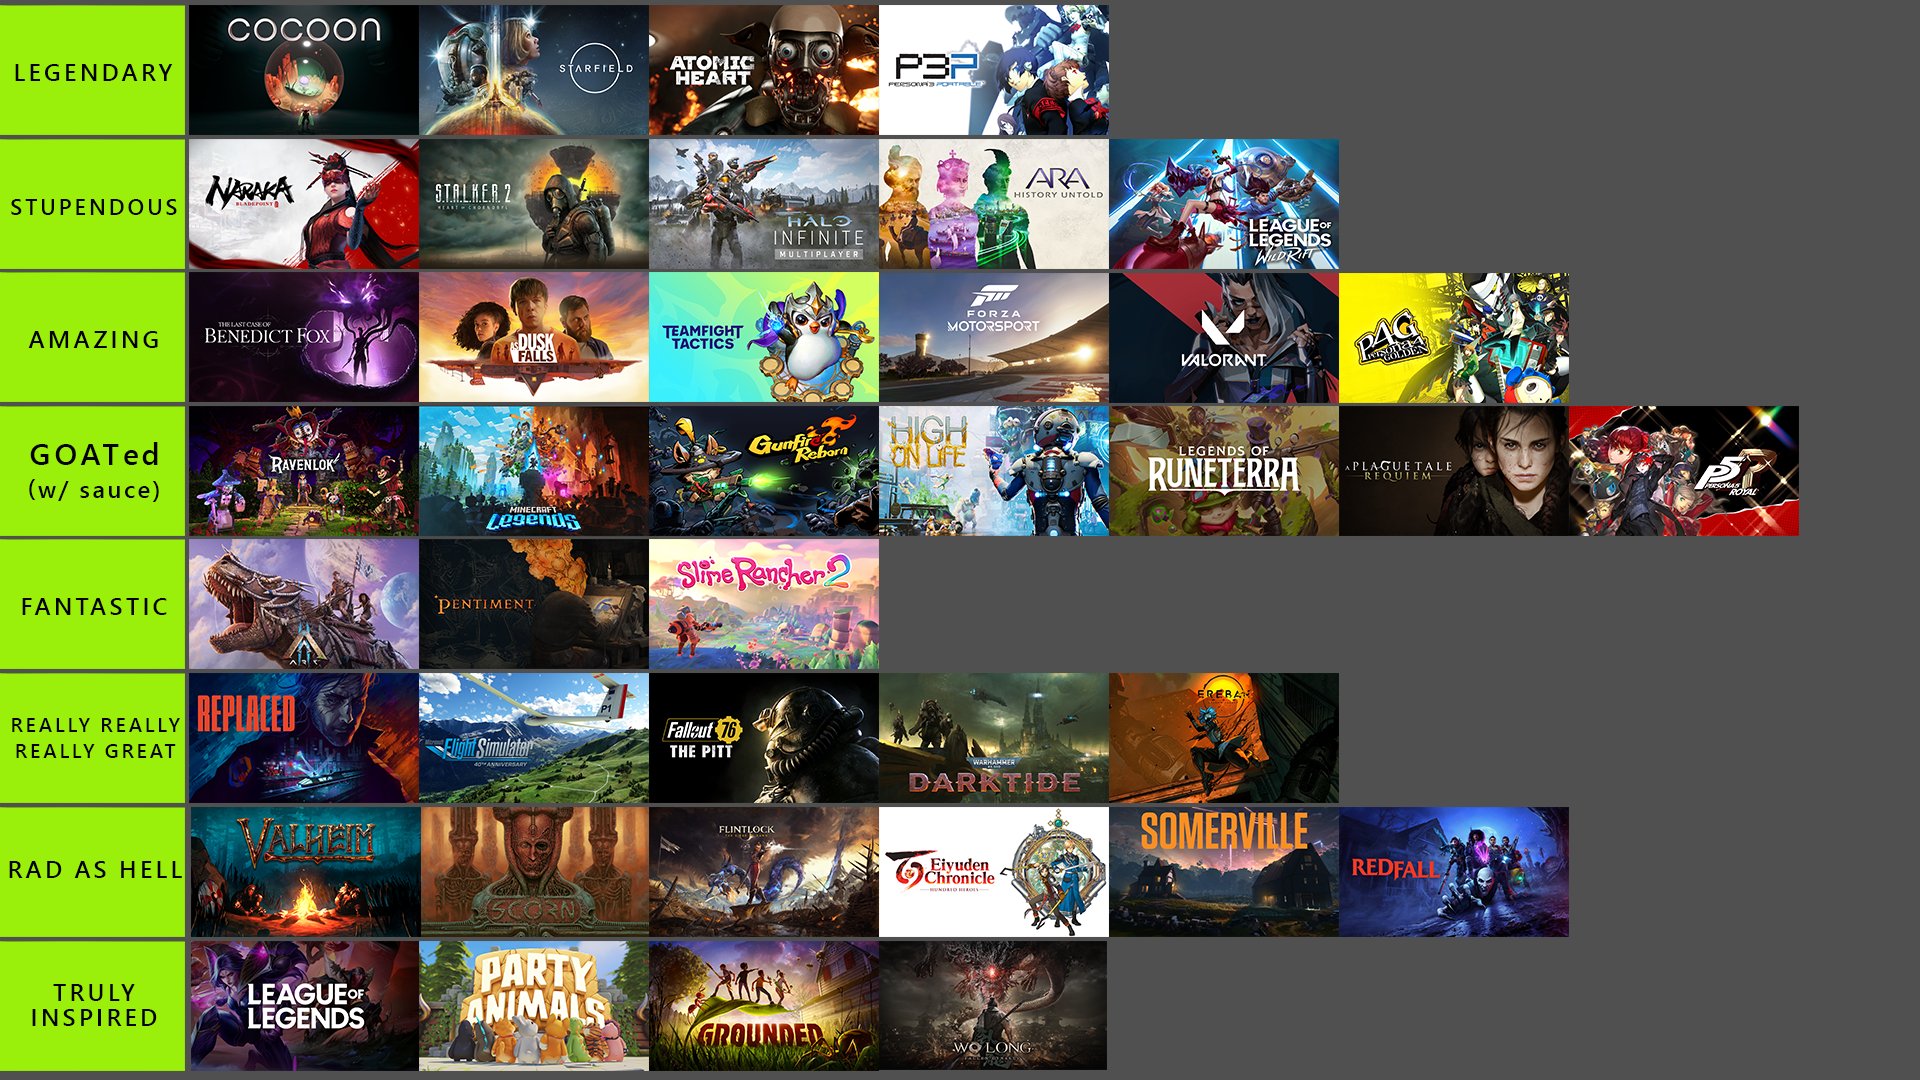 geleider Regenboog gevechten PC Game Pass on Twitter: "Official tier list for everything announced at  the Xbox &amp; Bethesda Games Showcase. hope there's no hard feelings ✌  https://t.co/rPvl9xK945" / Twitter